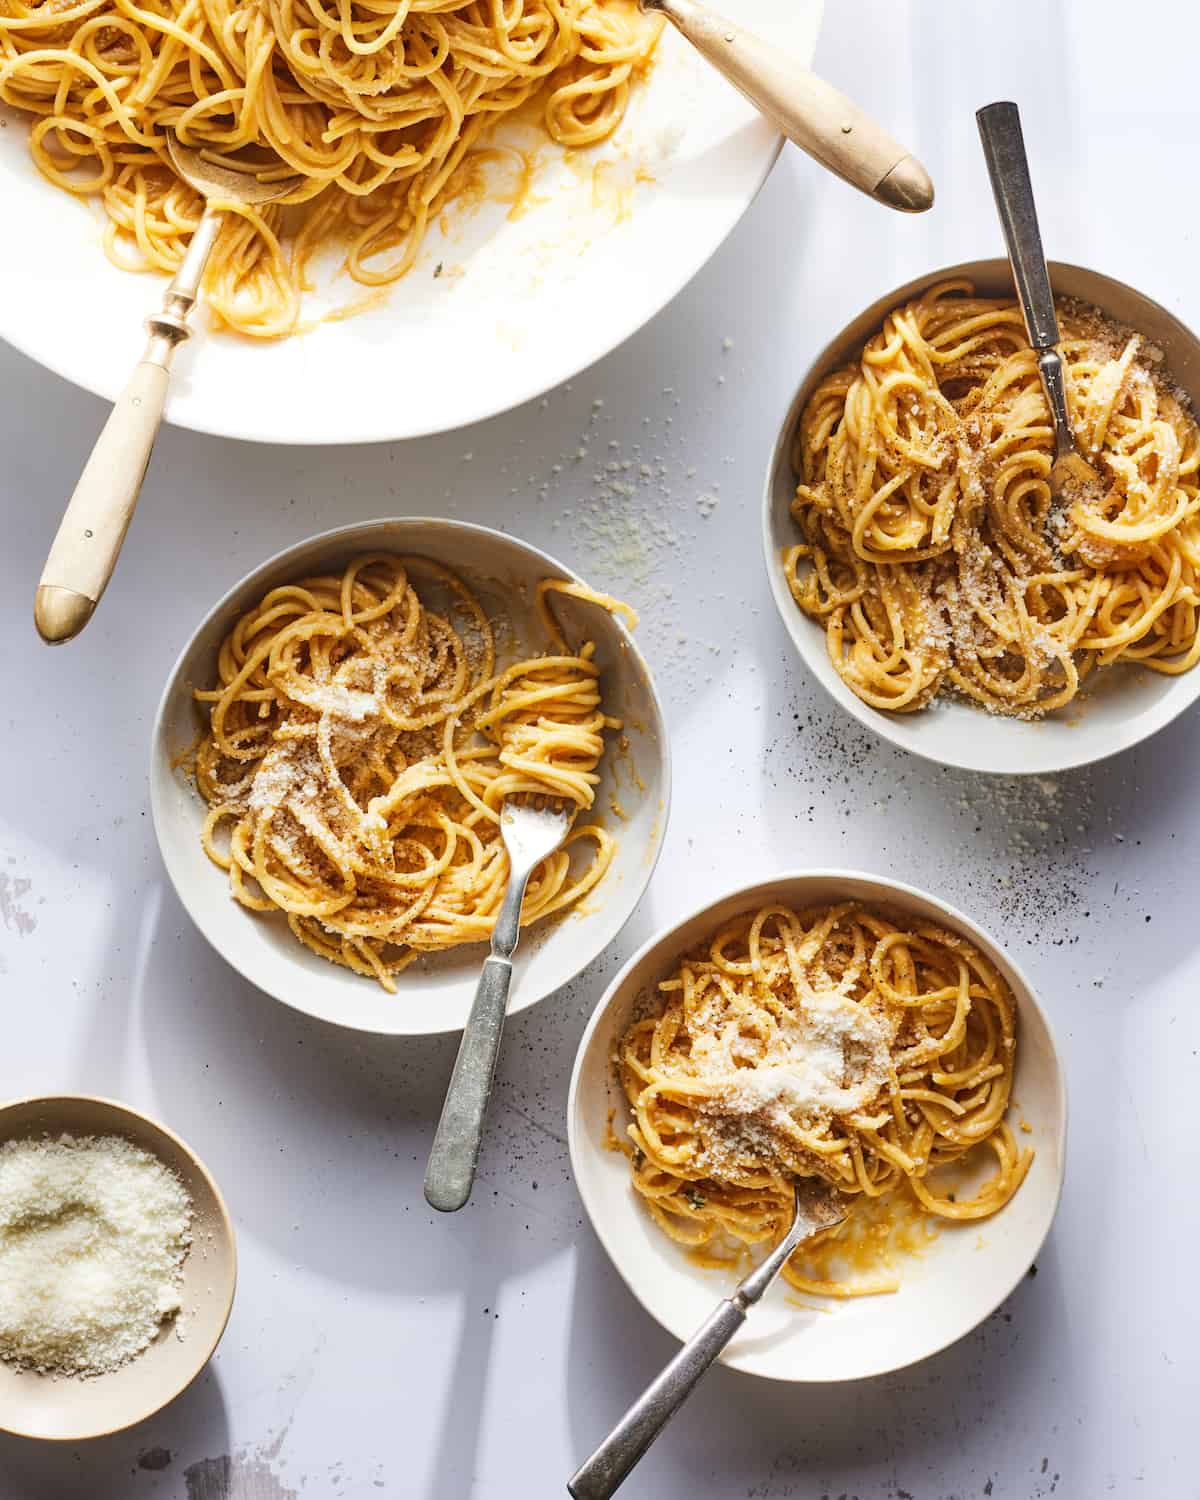 Three individual bowls of butternut squash pasta next to a large serving bowl of pasta and a small bowl of parmesan cheese.  